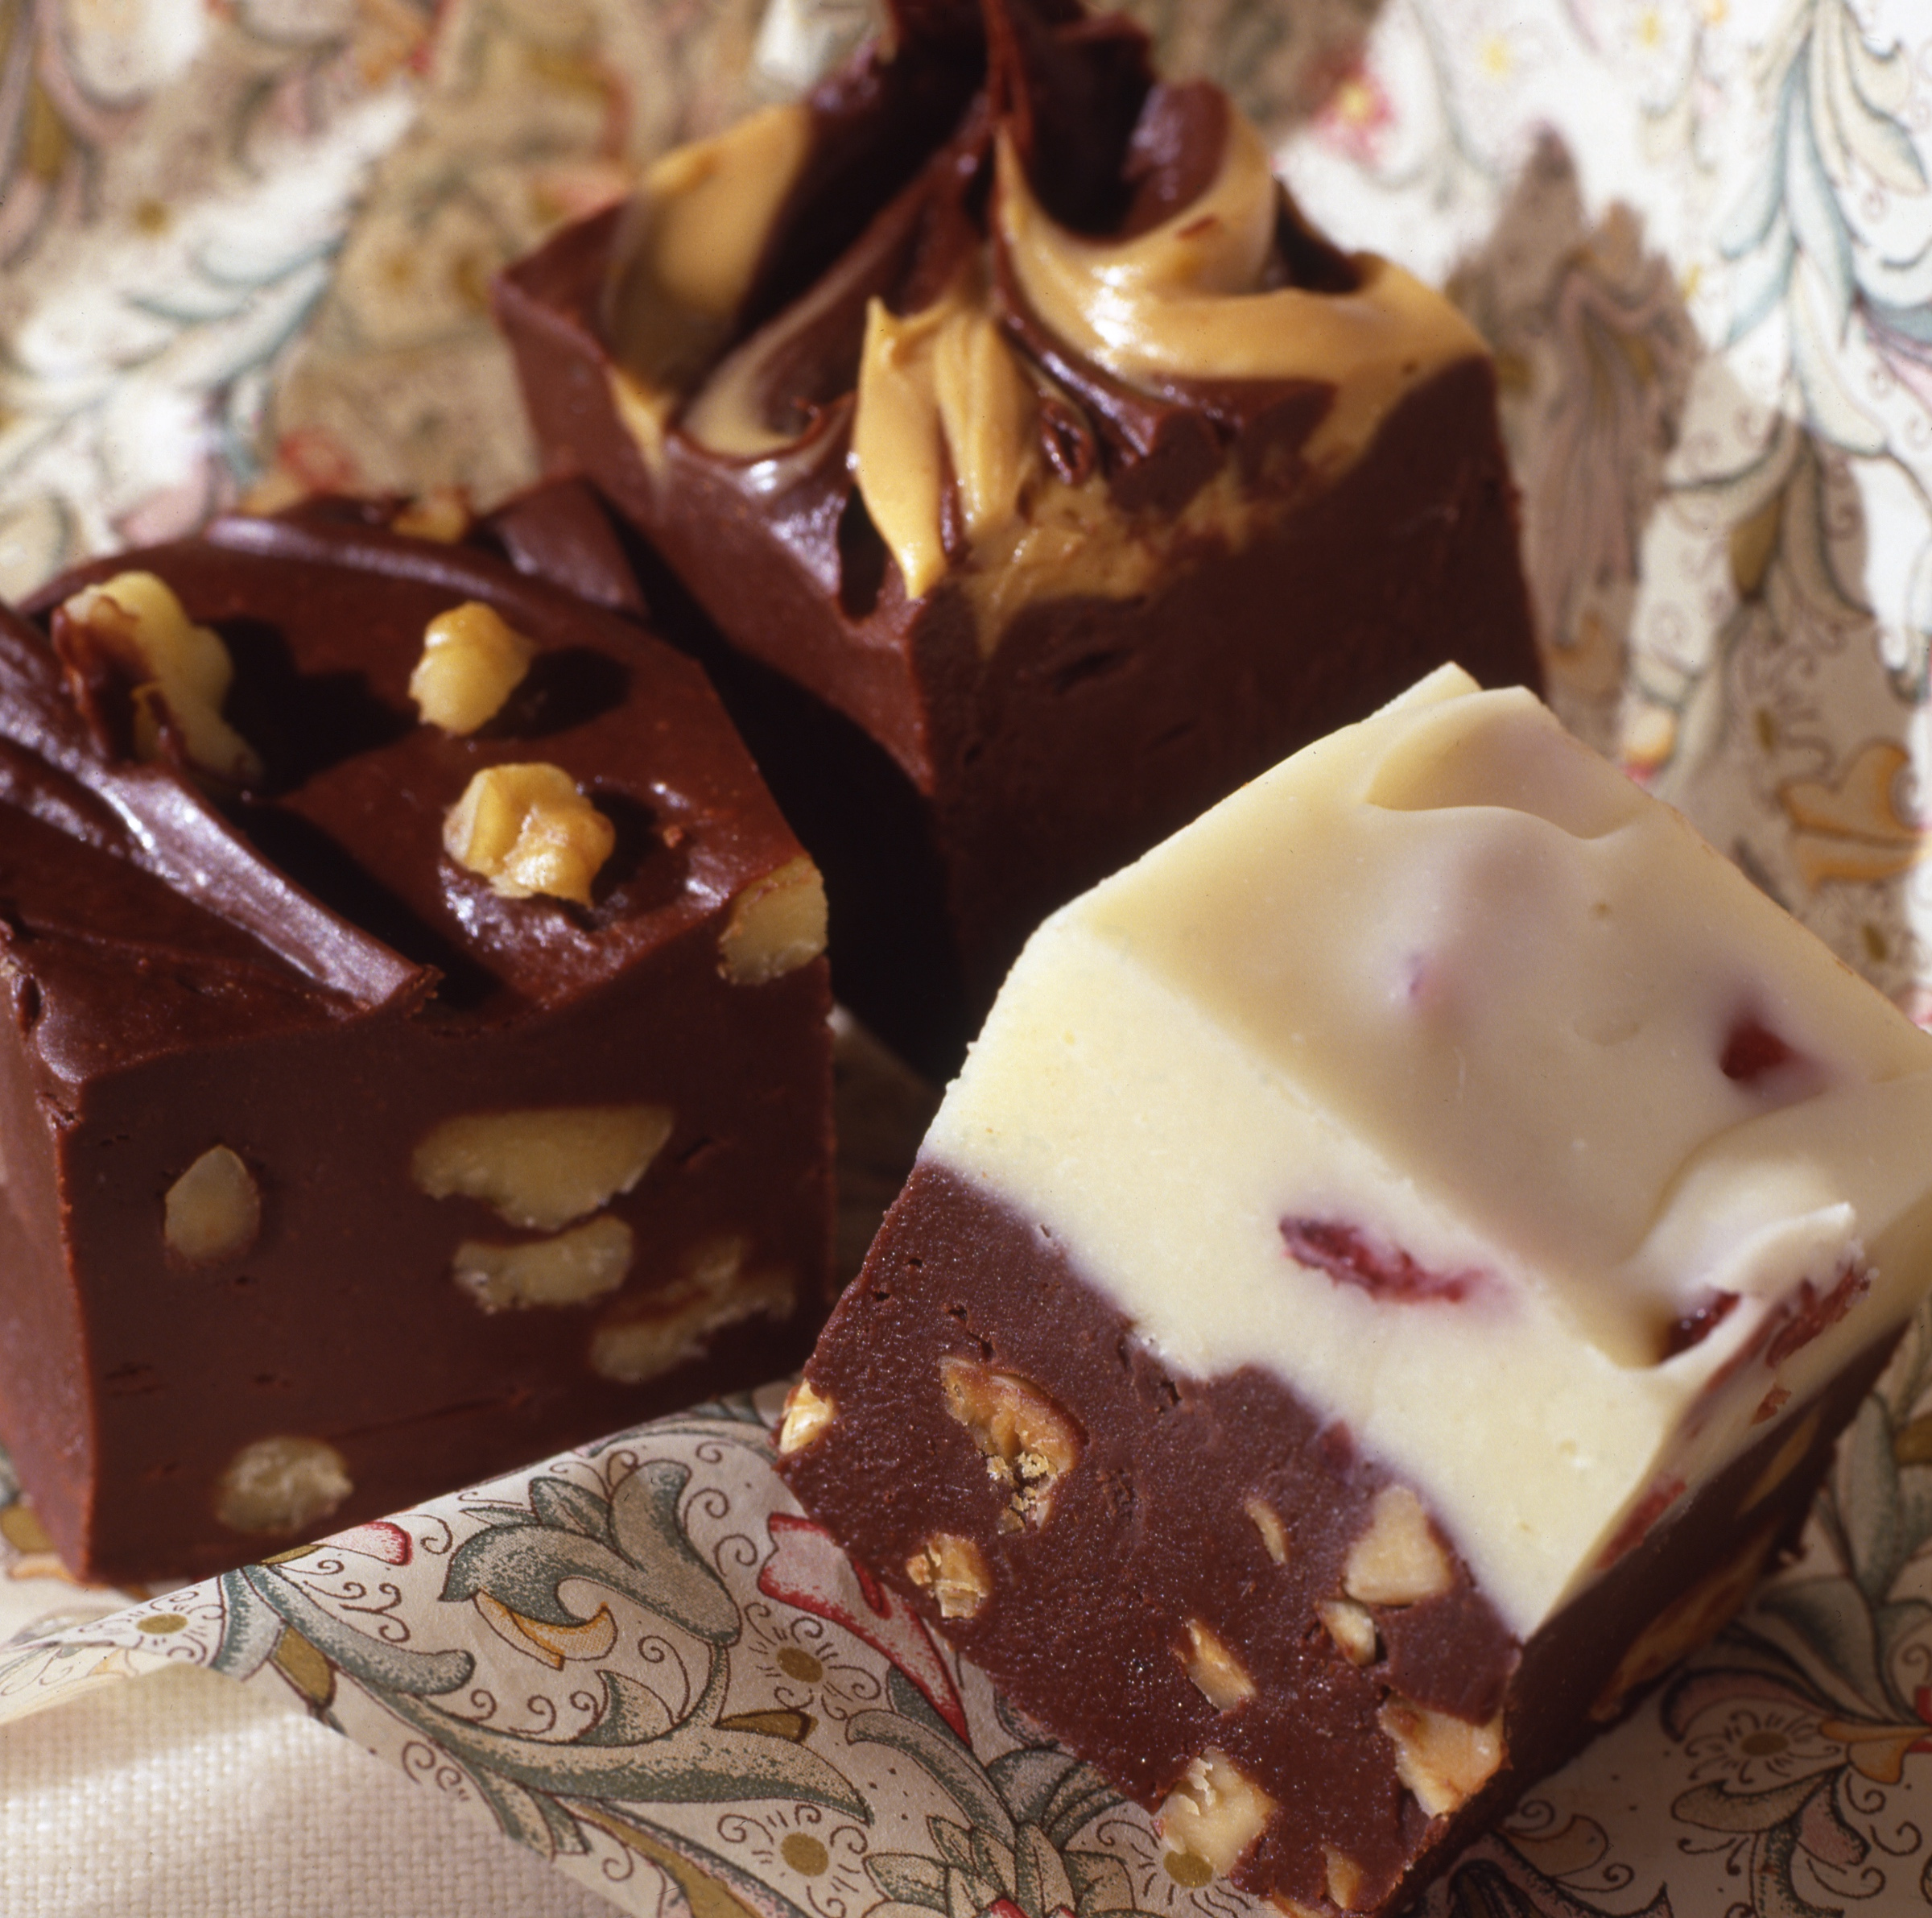 A close-up view of three pieces of fudge with nuts and peanut butter and white chocolate sitting on a patterned napkin